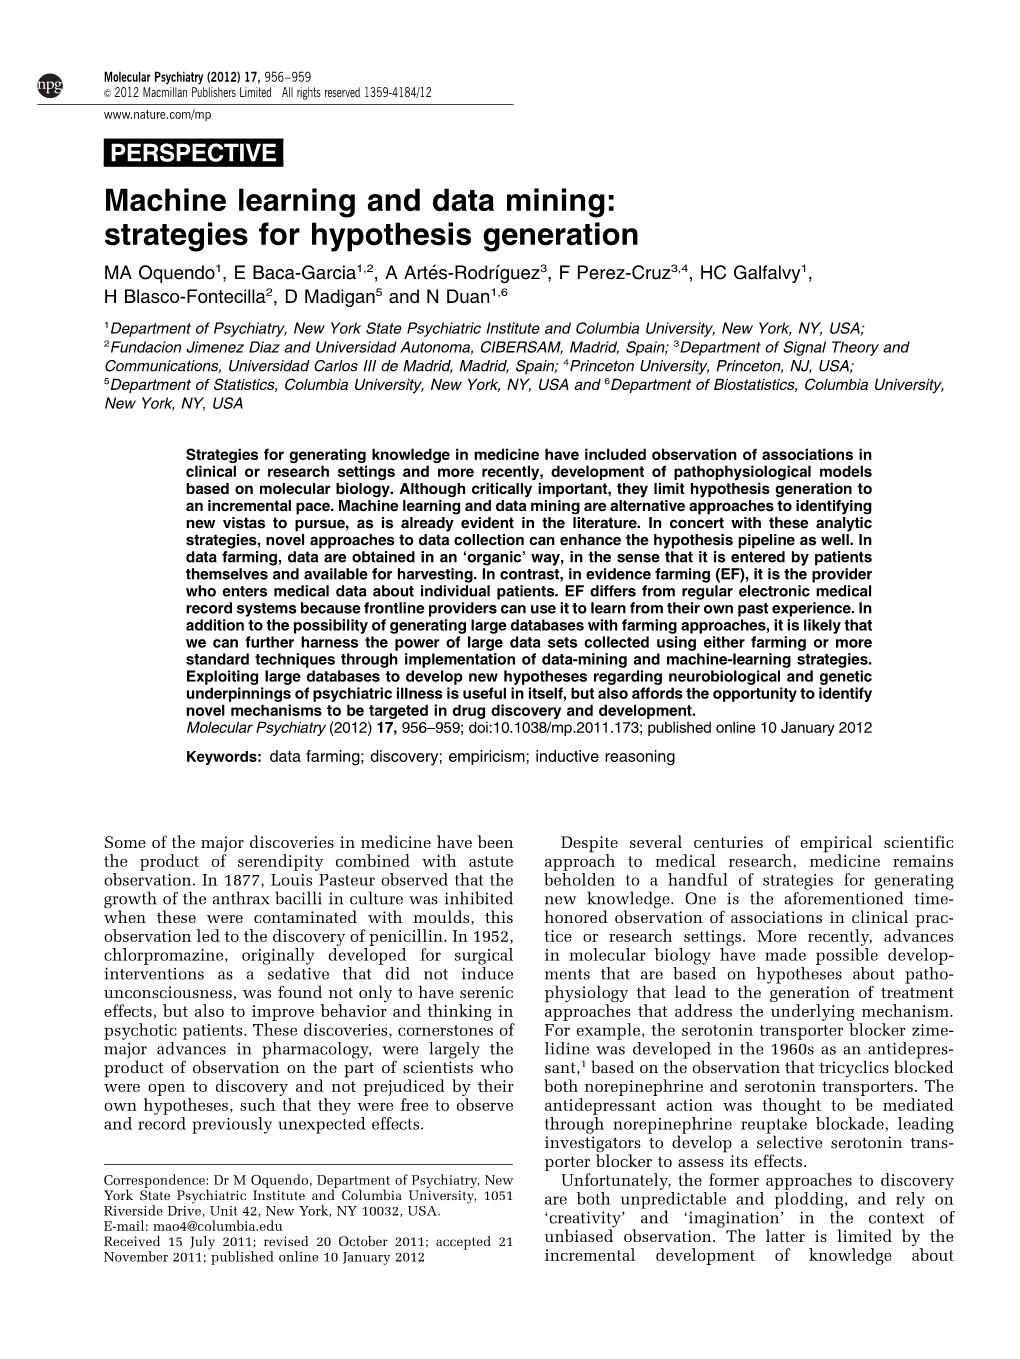 Machine Learning and Data Mining: Strategies for Hypothesis Generation